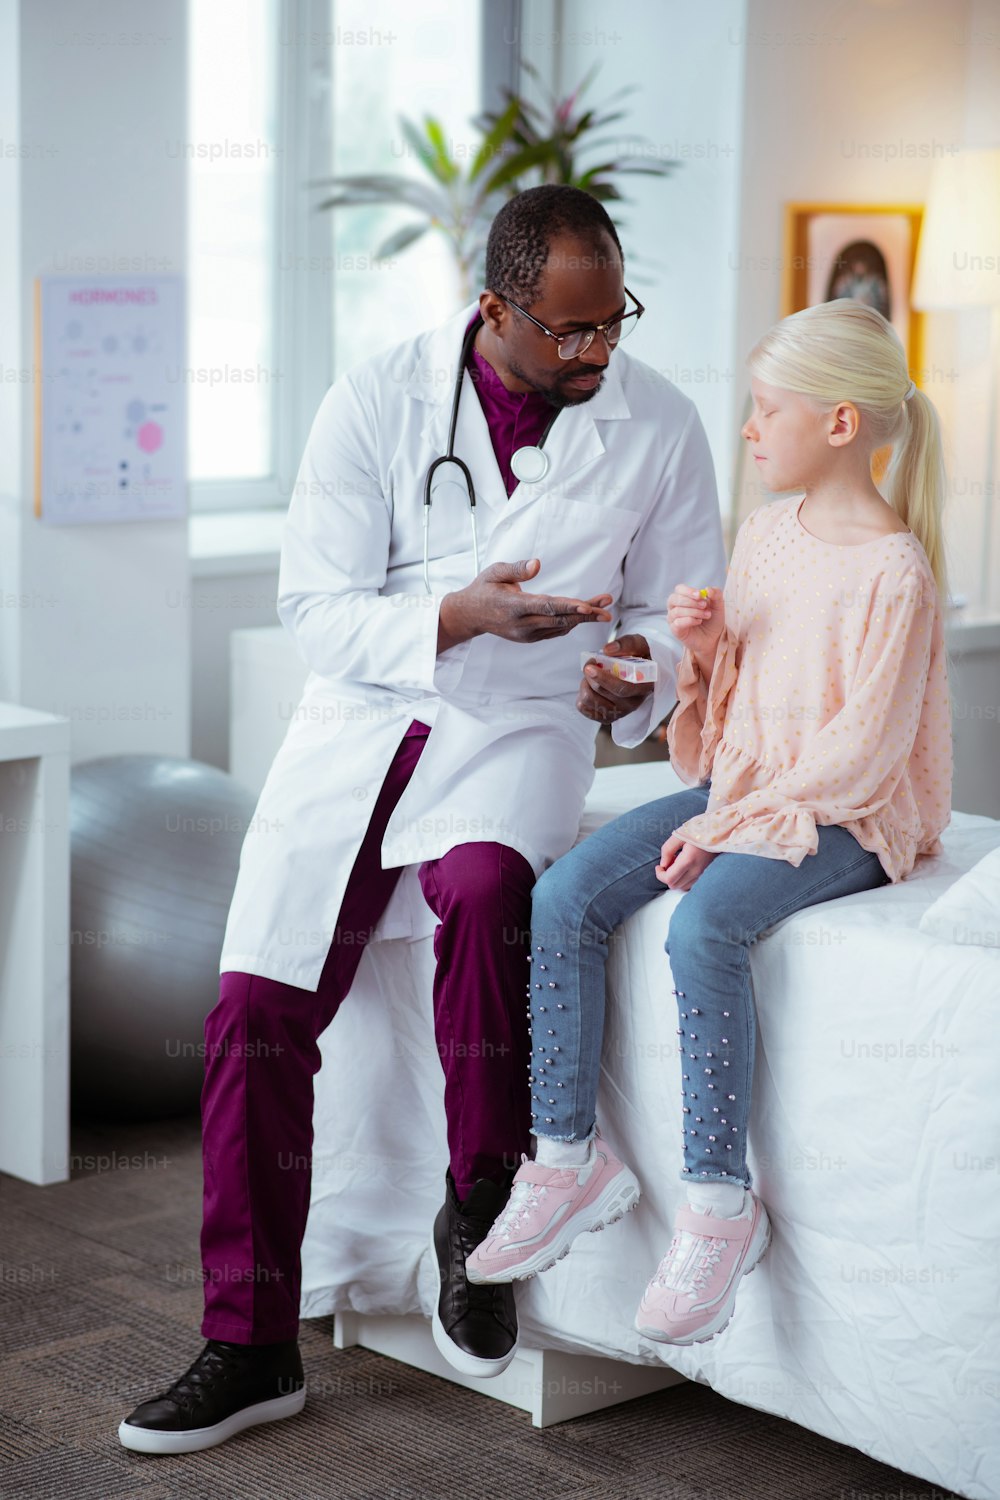 Sitting near doctor. Blonde-haired stylish girl wearing jeans and pink blouse sitting near doctor